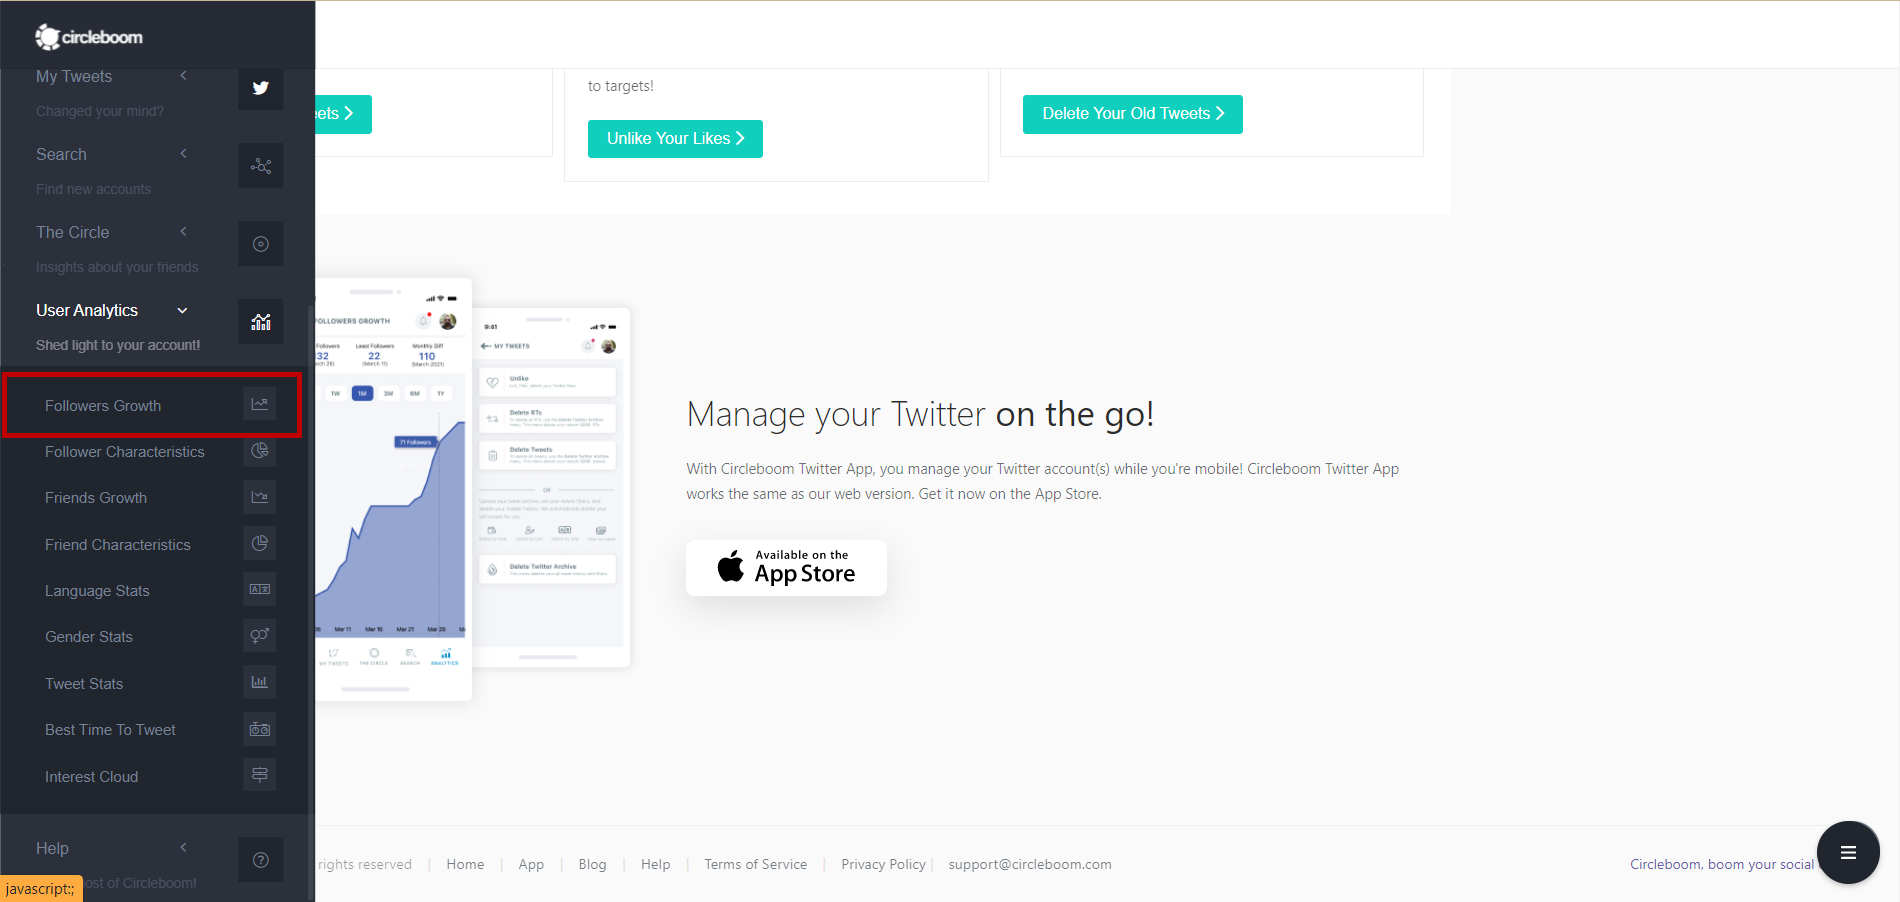 View your followers’ growth and export your Twitter data on Circleboom.